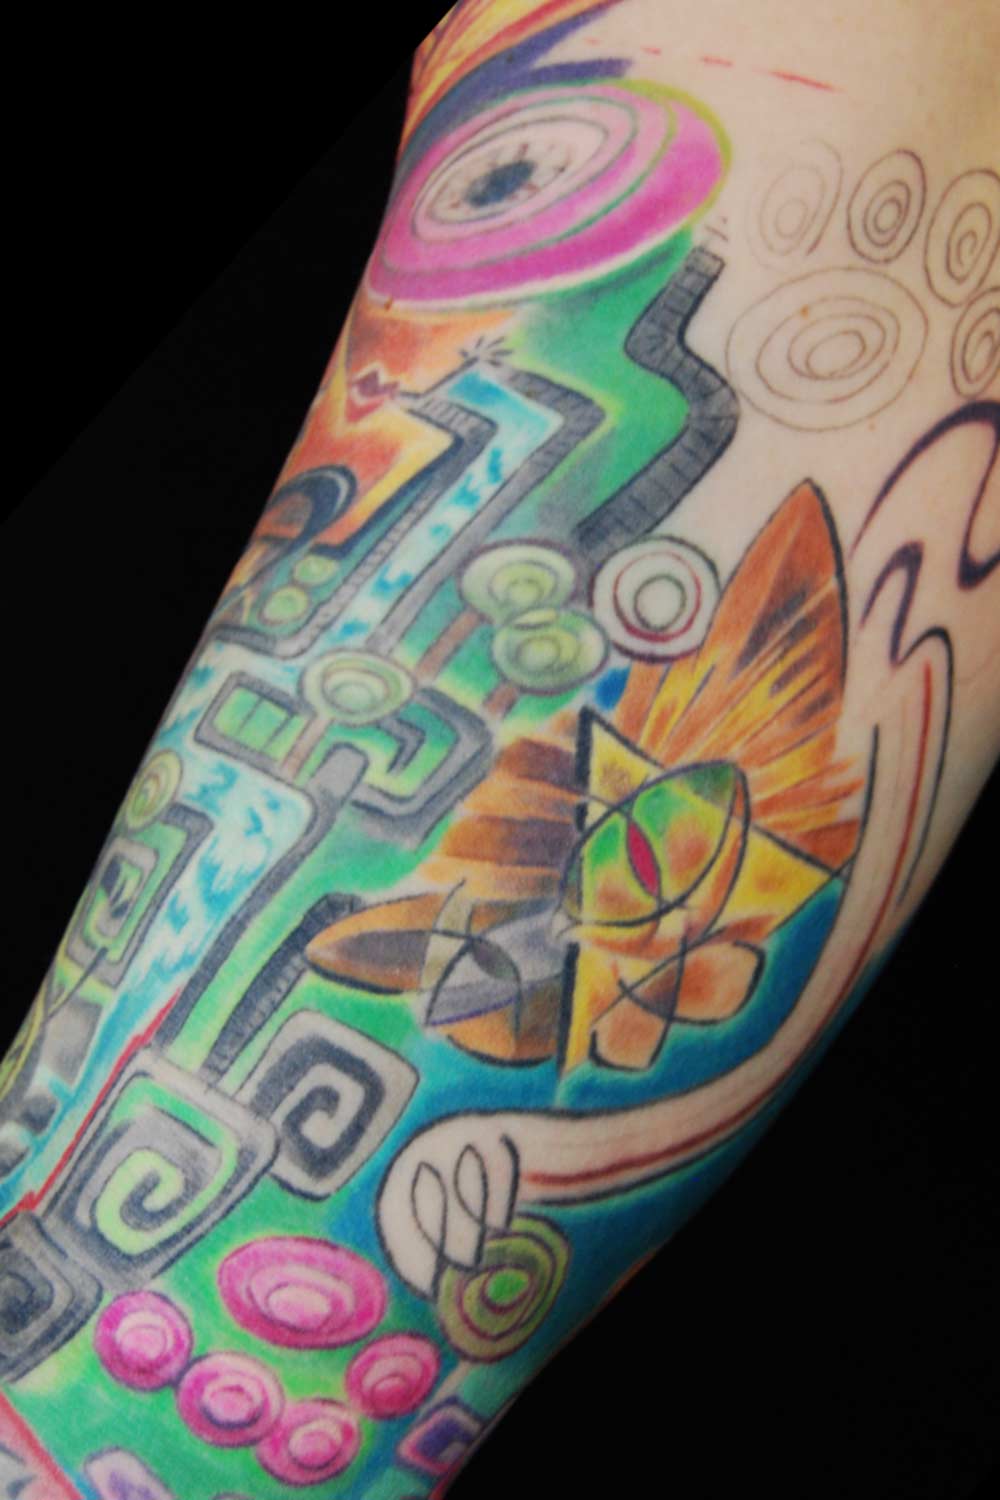 Dali-Hundertwasser-Cover-up--Überdeckung-Tattoo-Hits-for-Life-Shit-for-life-Raul-München-Innenarm-in-Arbeit